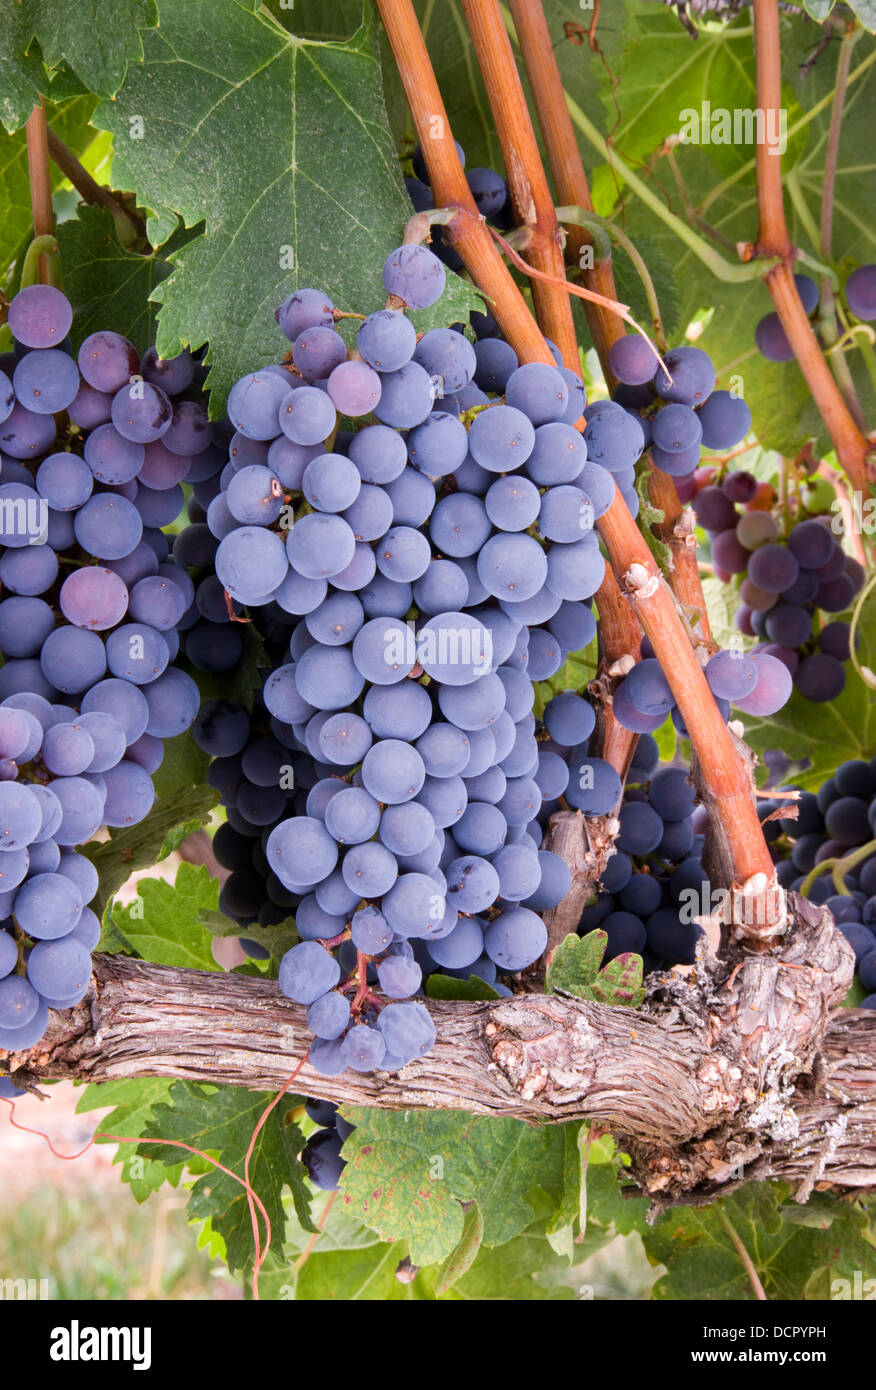 Grapes on the Vine Stock Photo